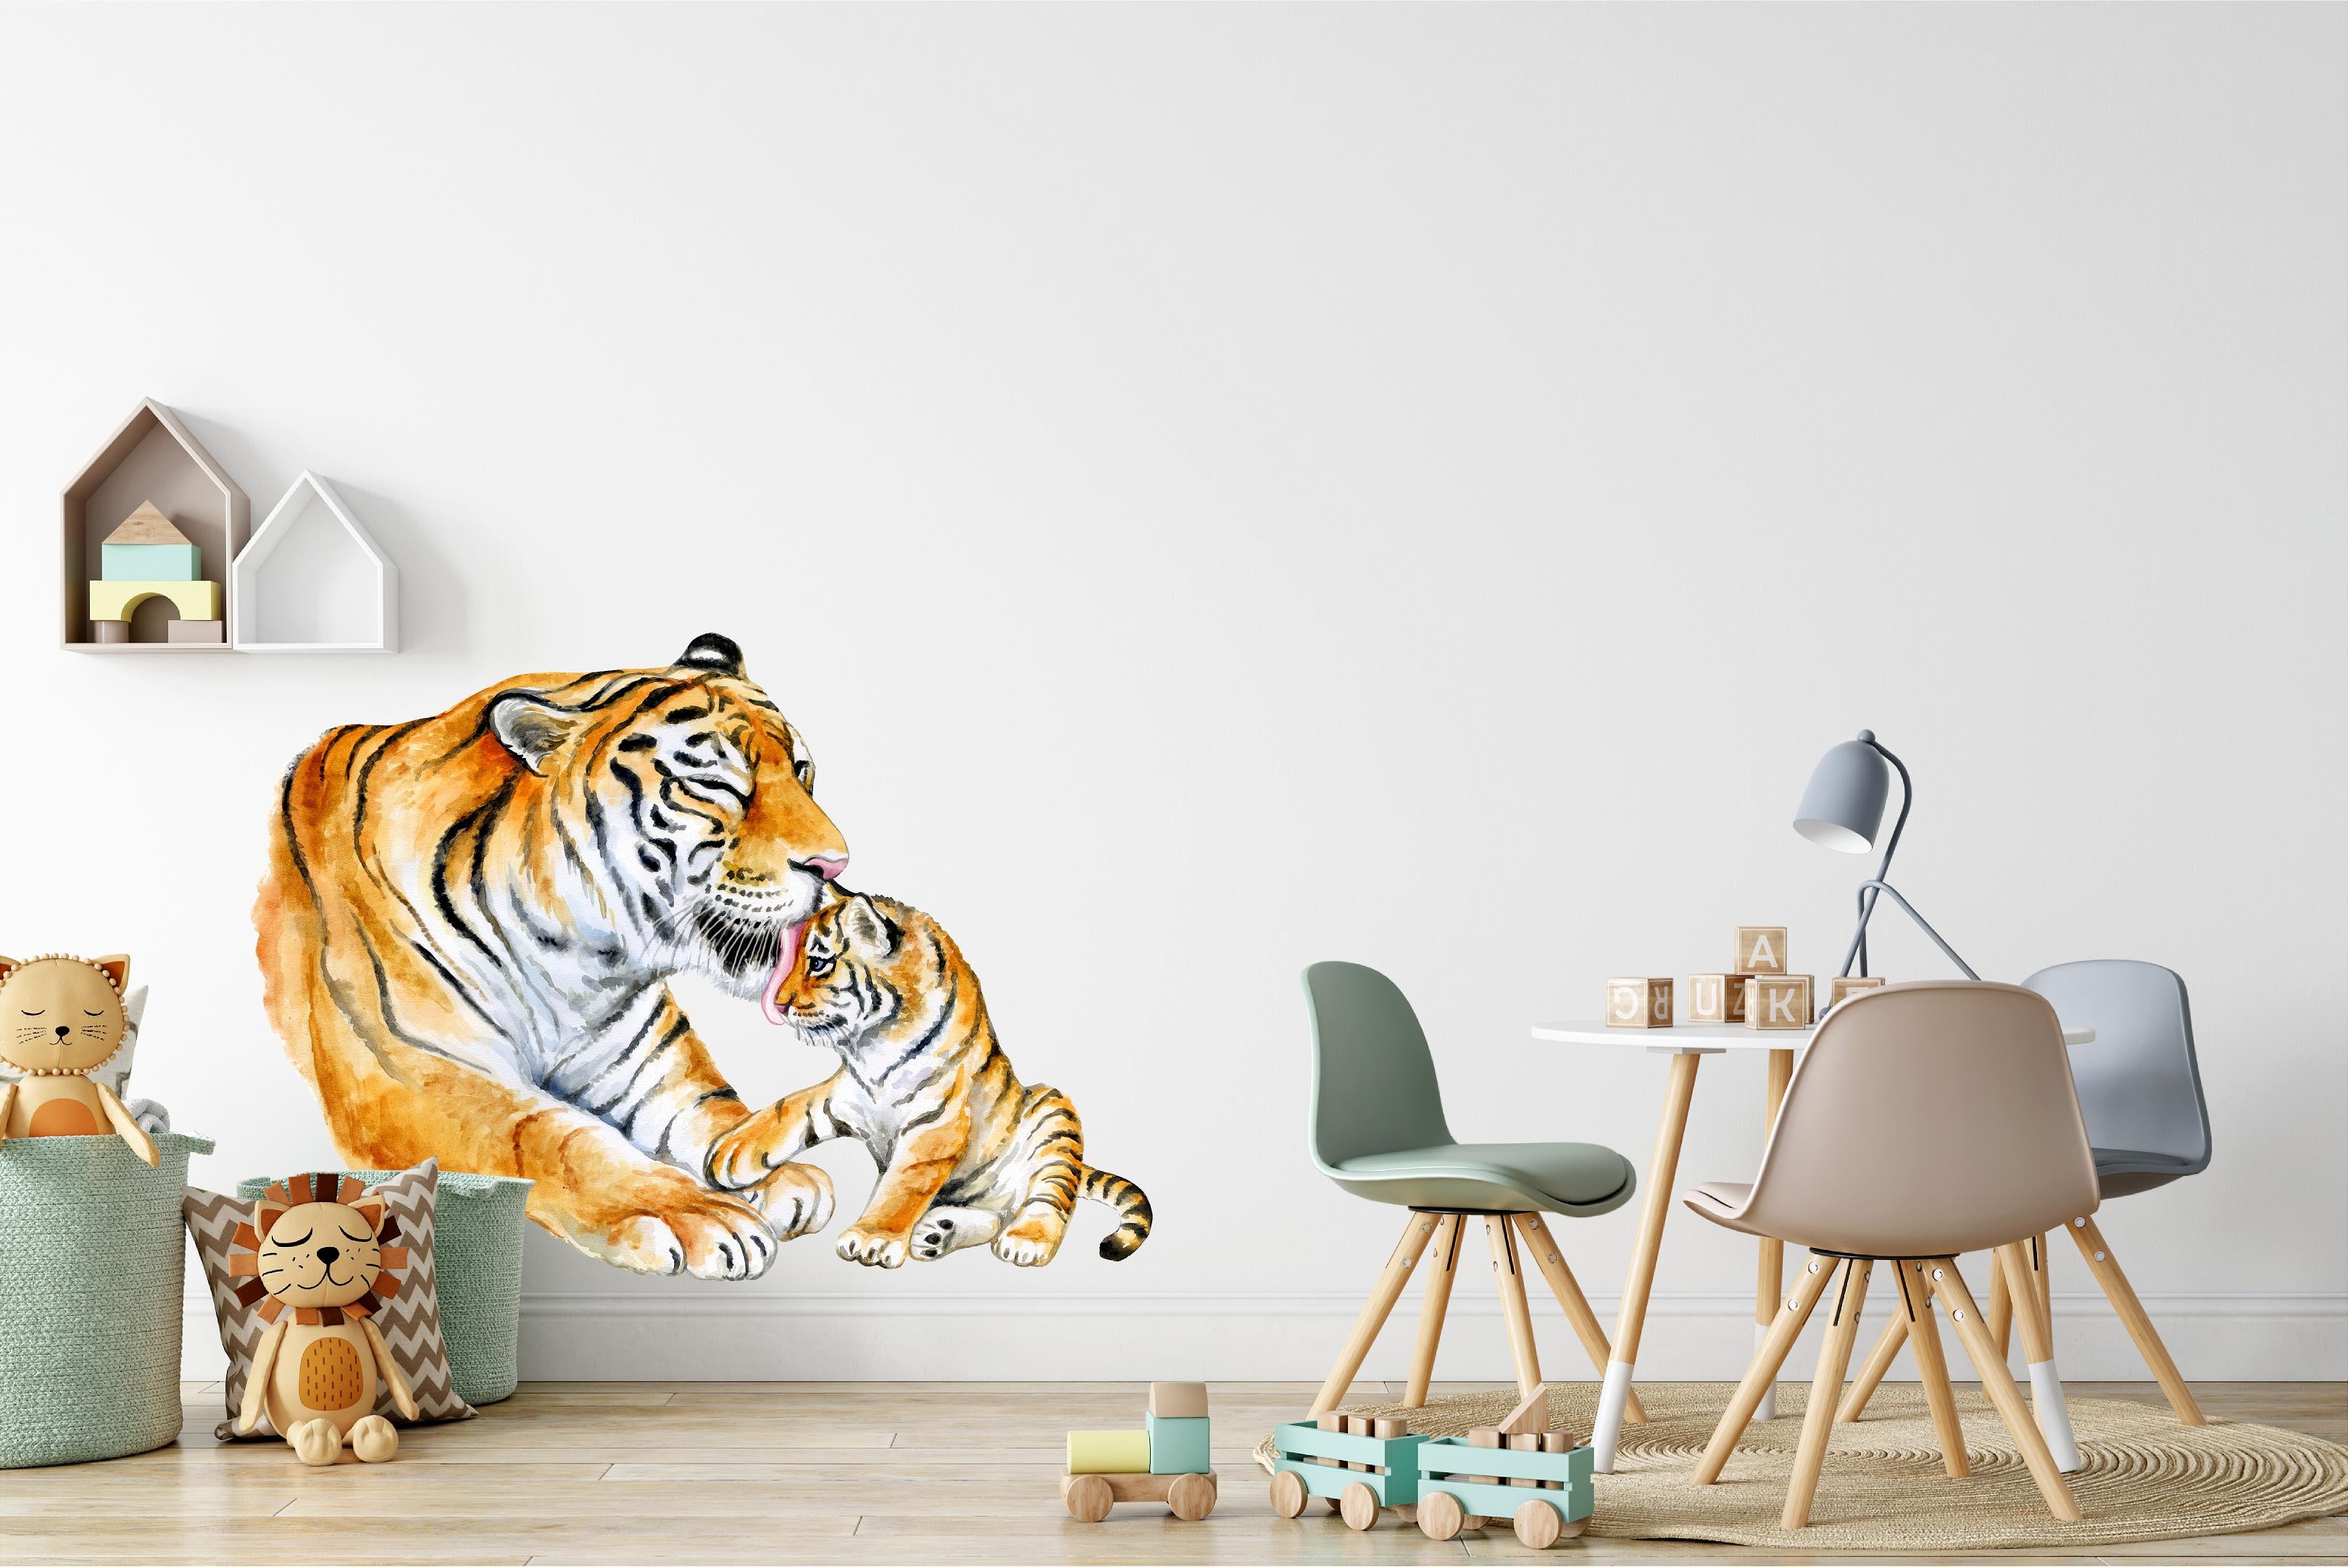 Mother Tiger Cleaning Baby Cub Wall Decal Safari Animal Fabric Wall Sticker | DecalBaby